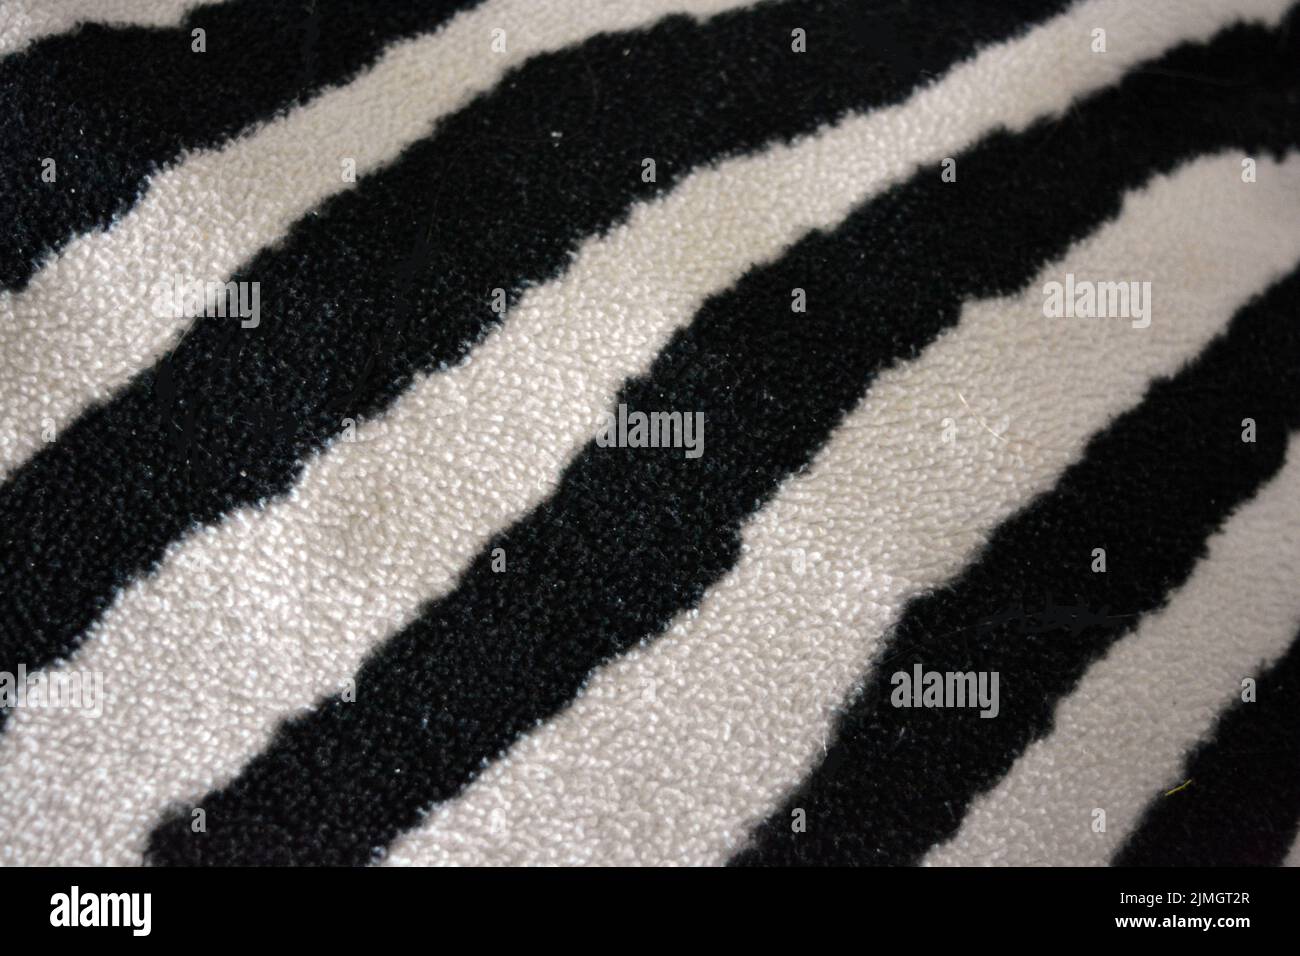 Soft, pleasant, fluffy fabric in the form of zebra, white tiger colors. Fabric animal background consisting of black and white chaotic lines, stripes, Stock Photo